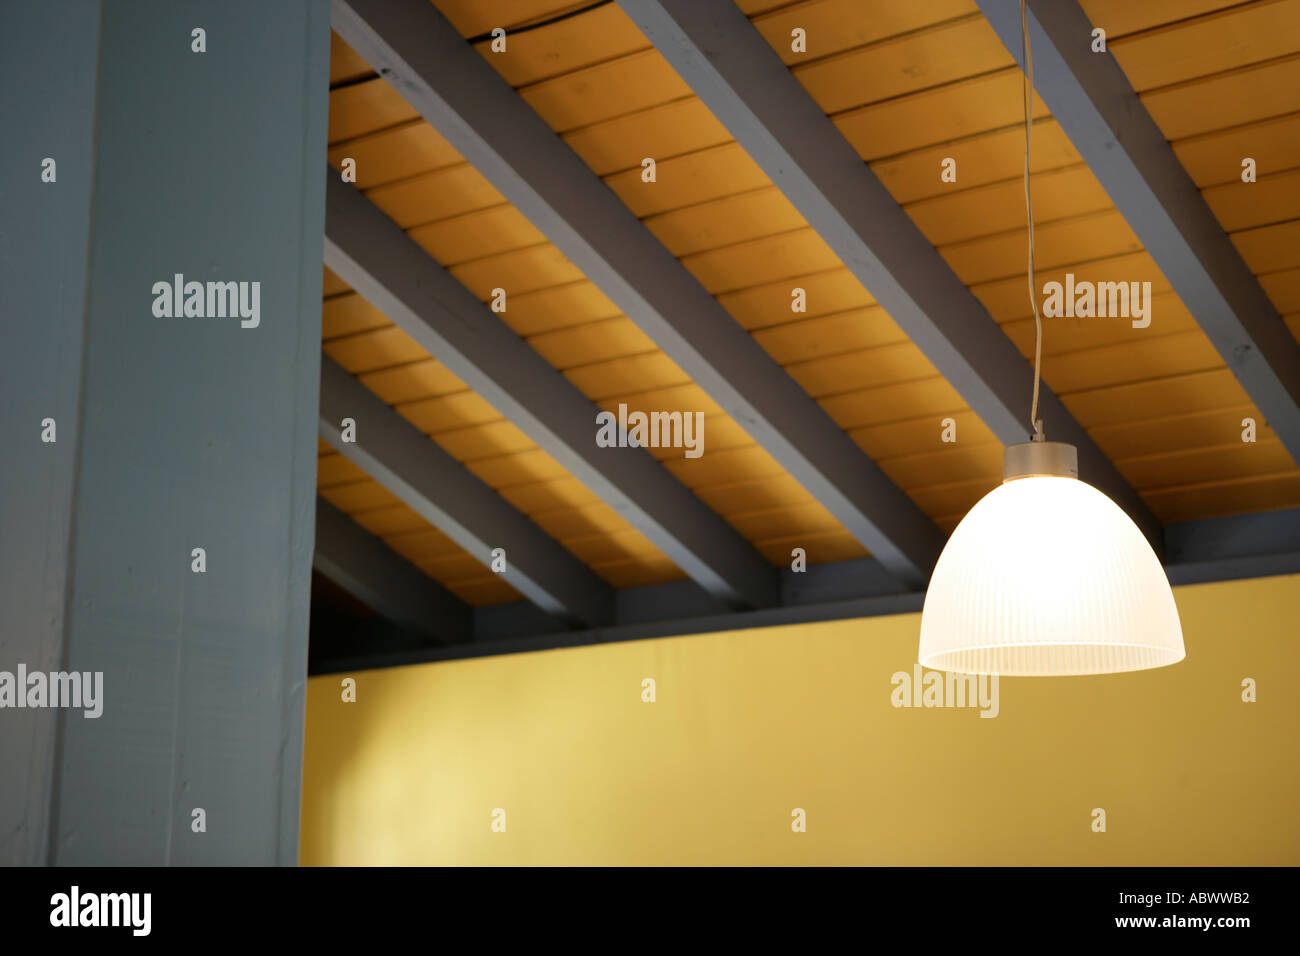 A Slatted Ceiling With Painted Wooden Beams Stock Photo 4236721